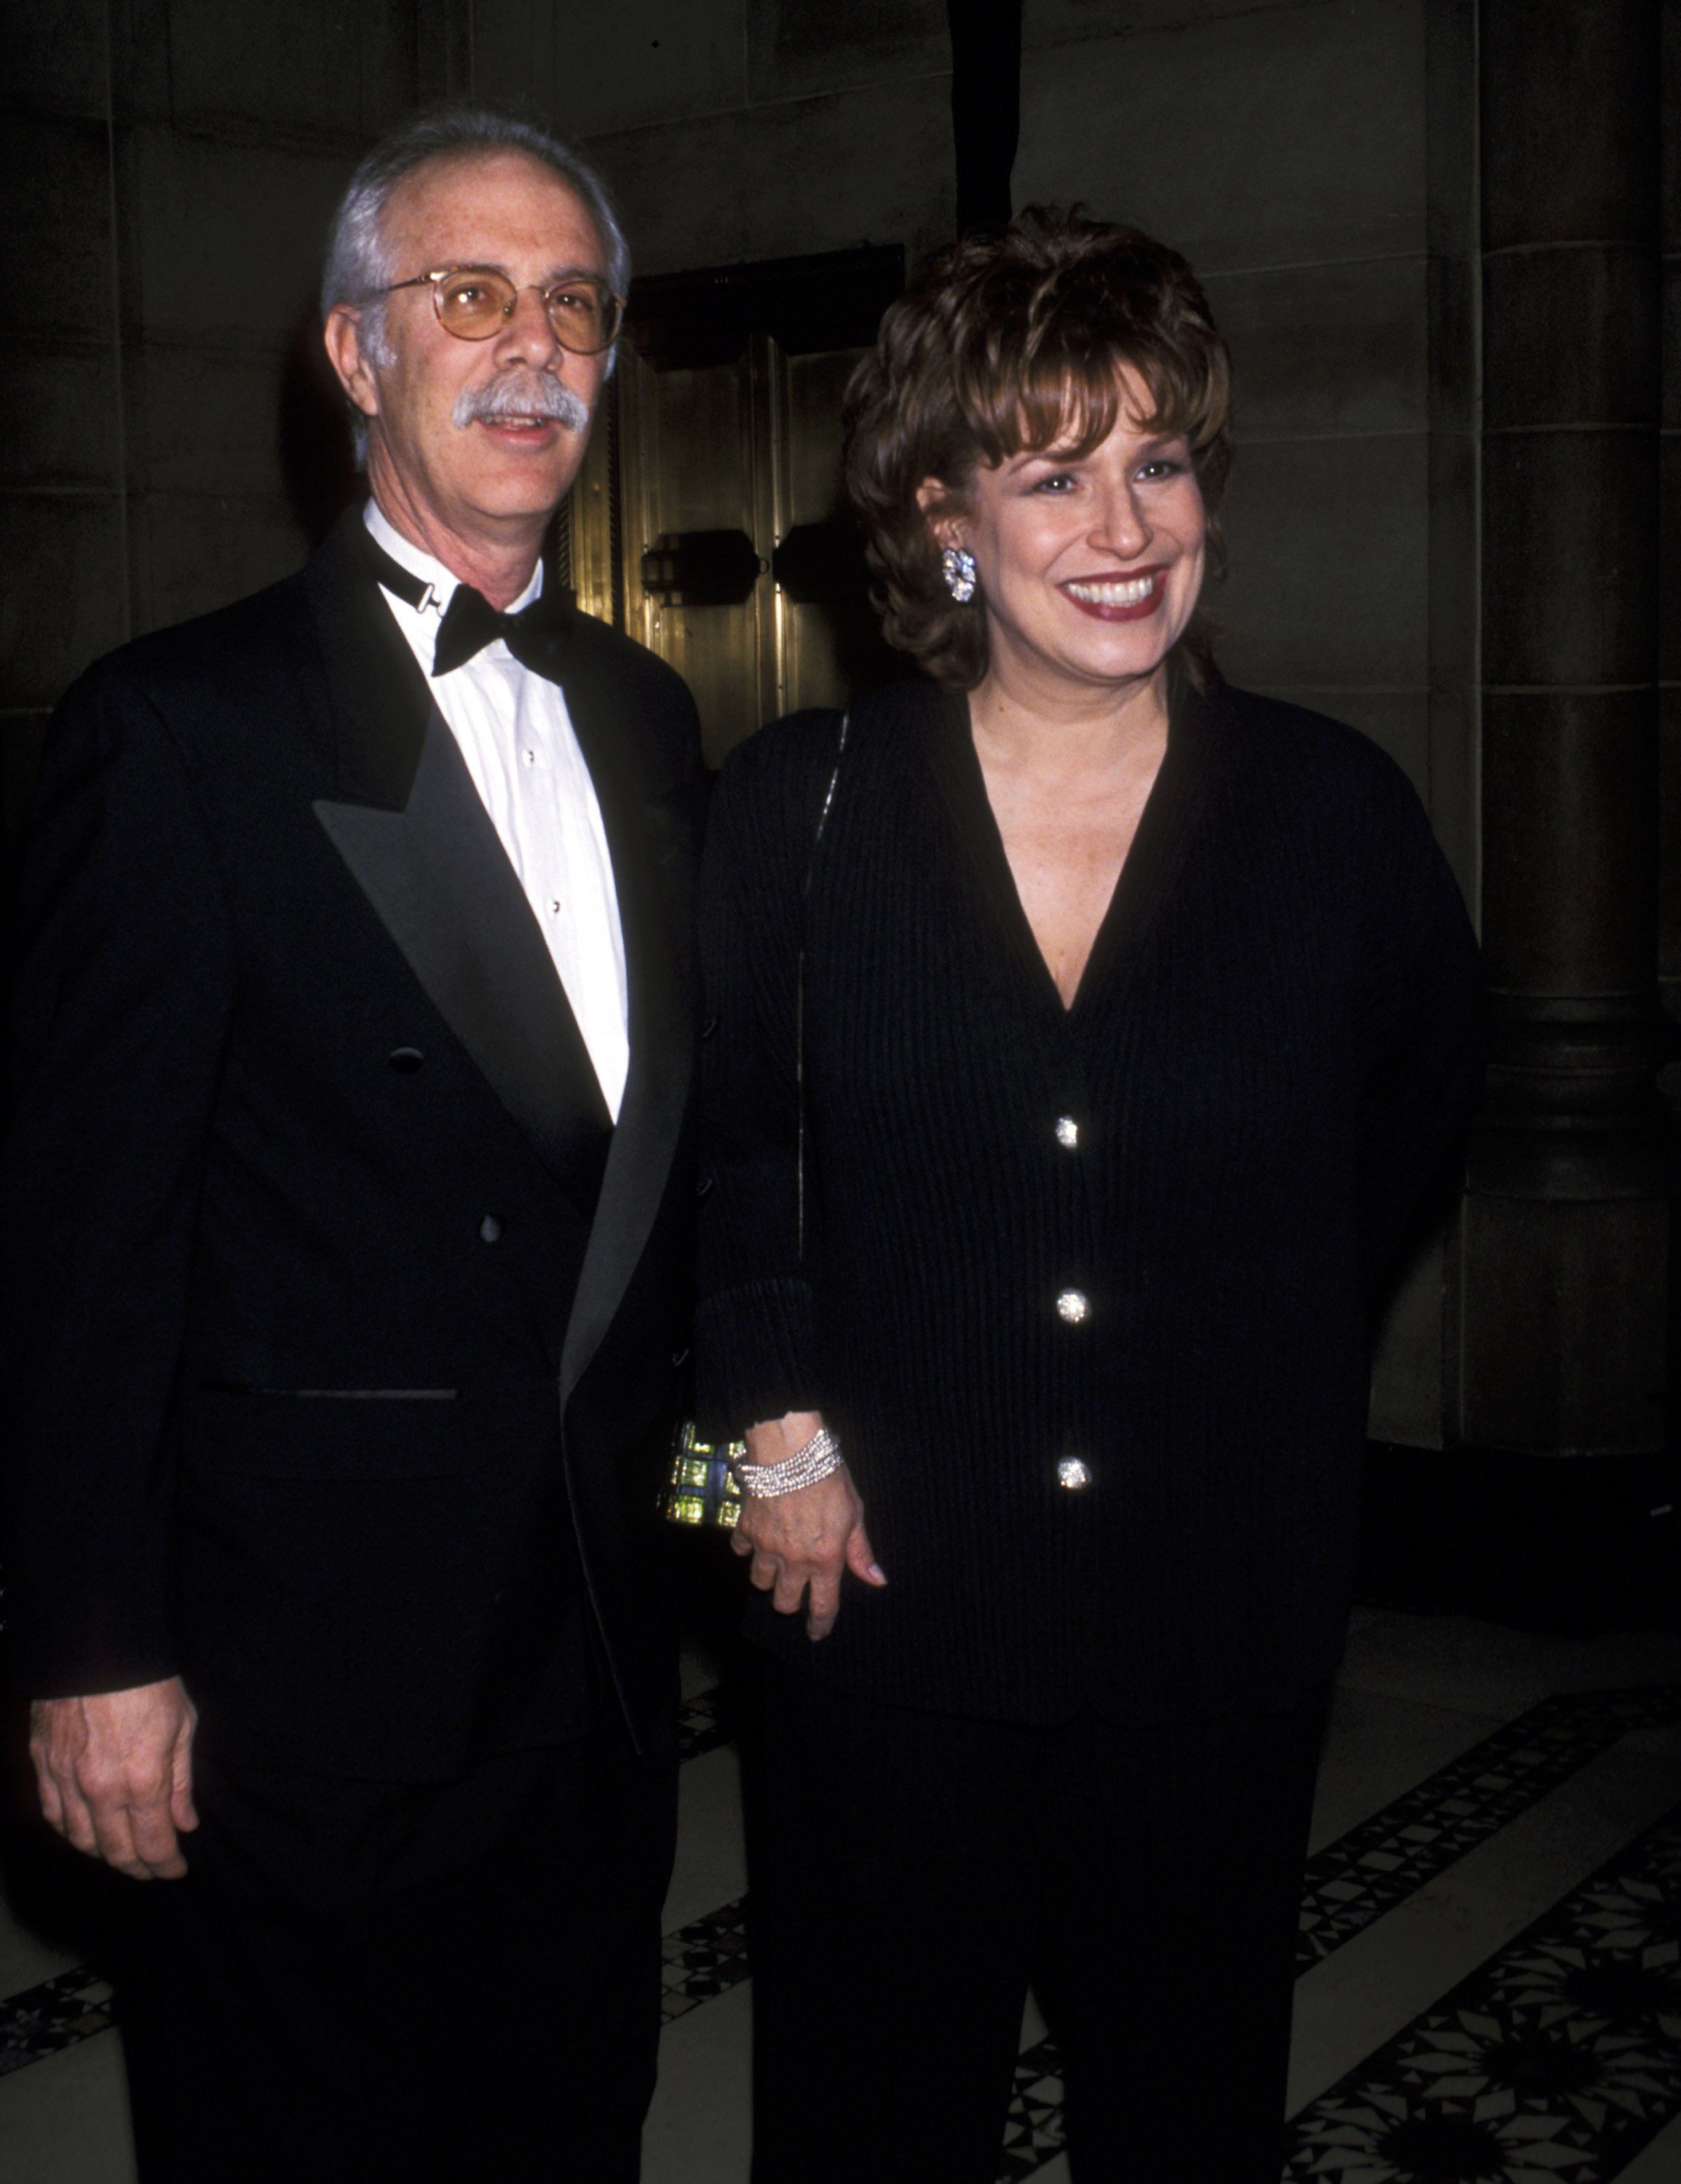 Steve Janowitz and Joy Behar at The Children's Hearing Institute Gala on April 26, 2001 | Source: Getty Images